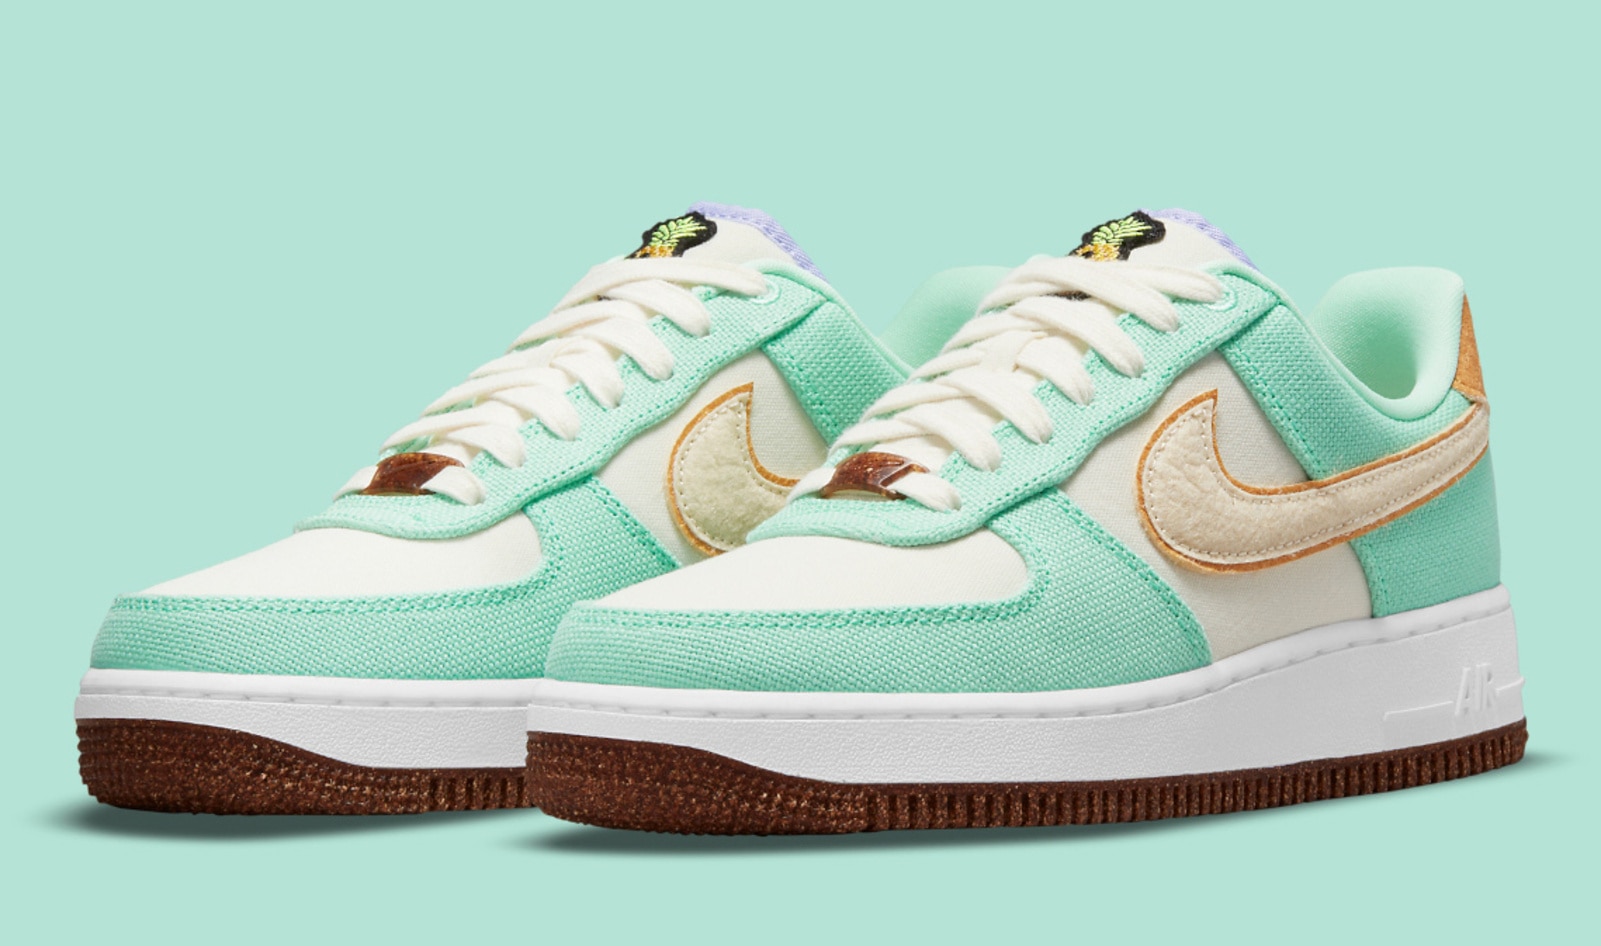 Centímetro Cesta Excremento Nike's Iconic Air Force Ones Get a Vegan Pineapple Leather Makeover |  VegNews